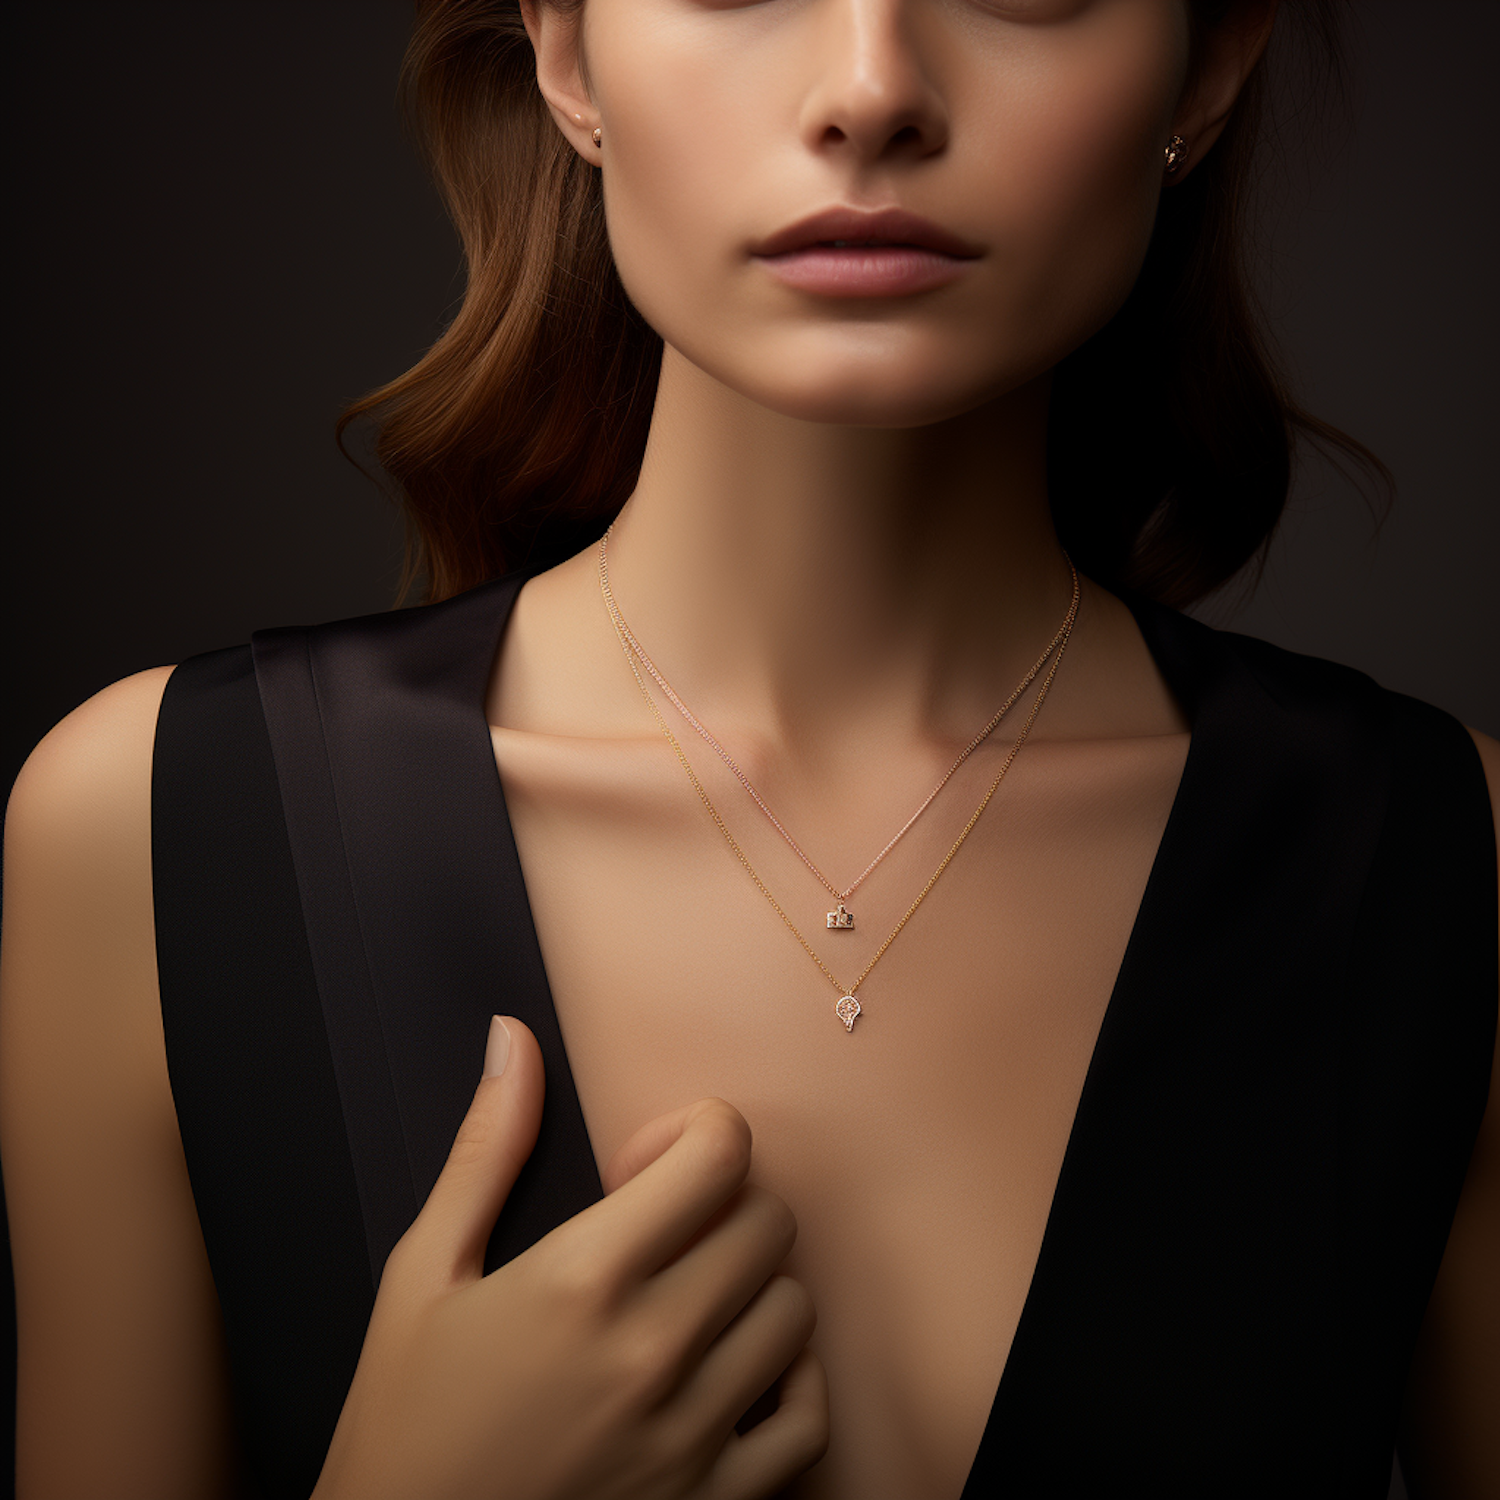 Elegance in Portraiture: Sophisticated Lady with Layered Necklaces